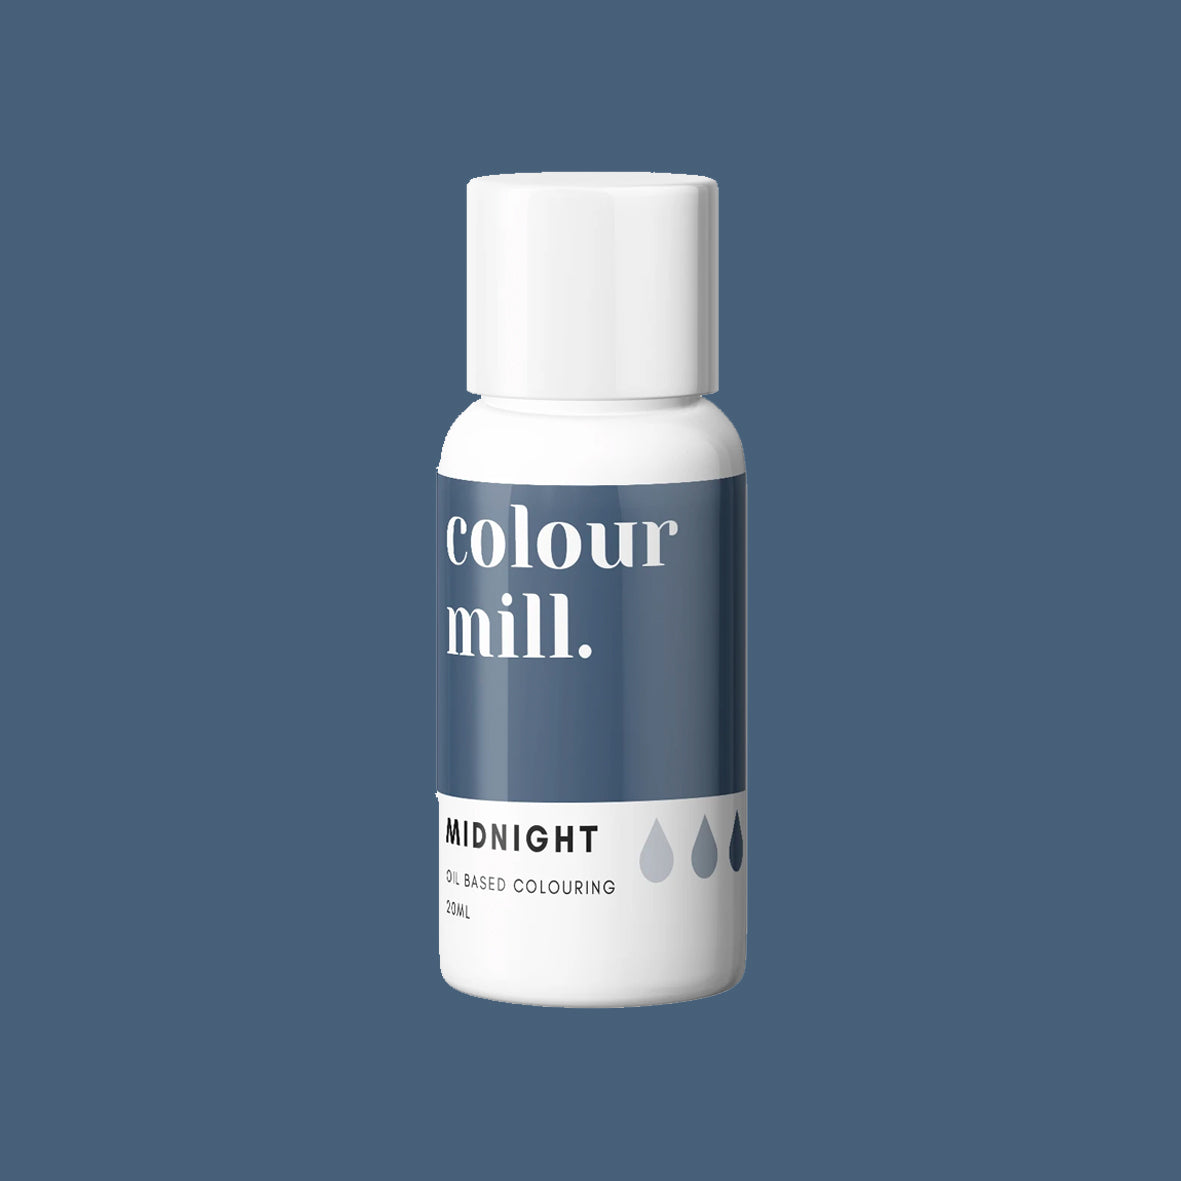 MIDNIGHT oil based concentrated icing colouring 20ml